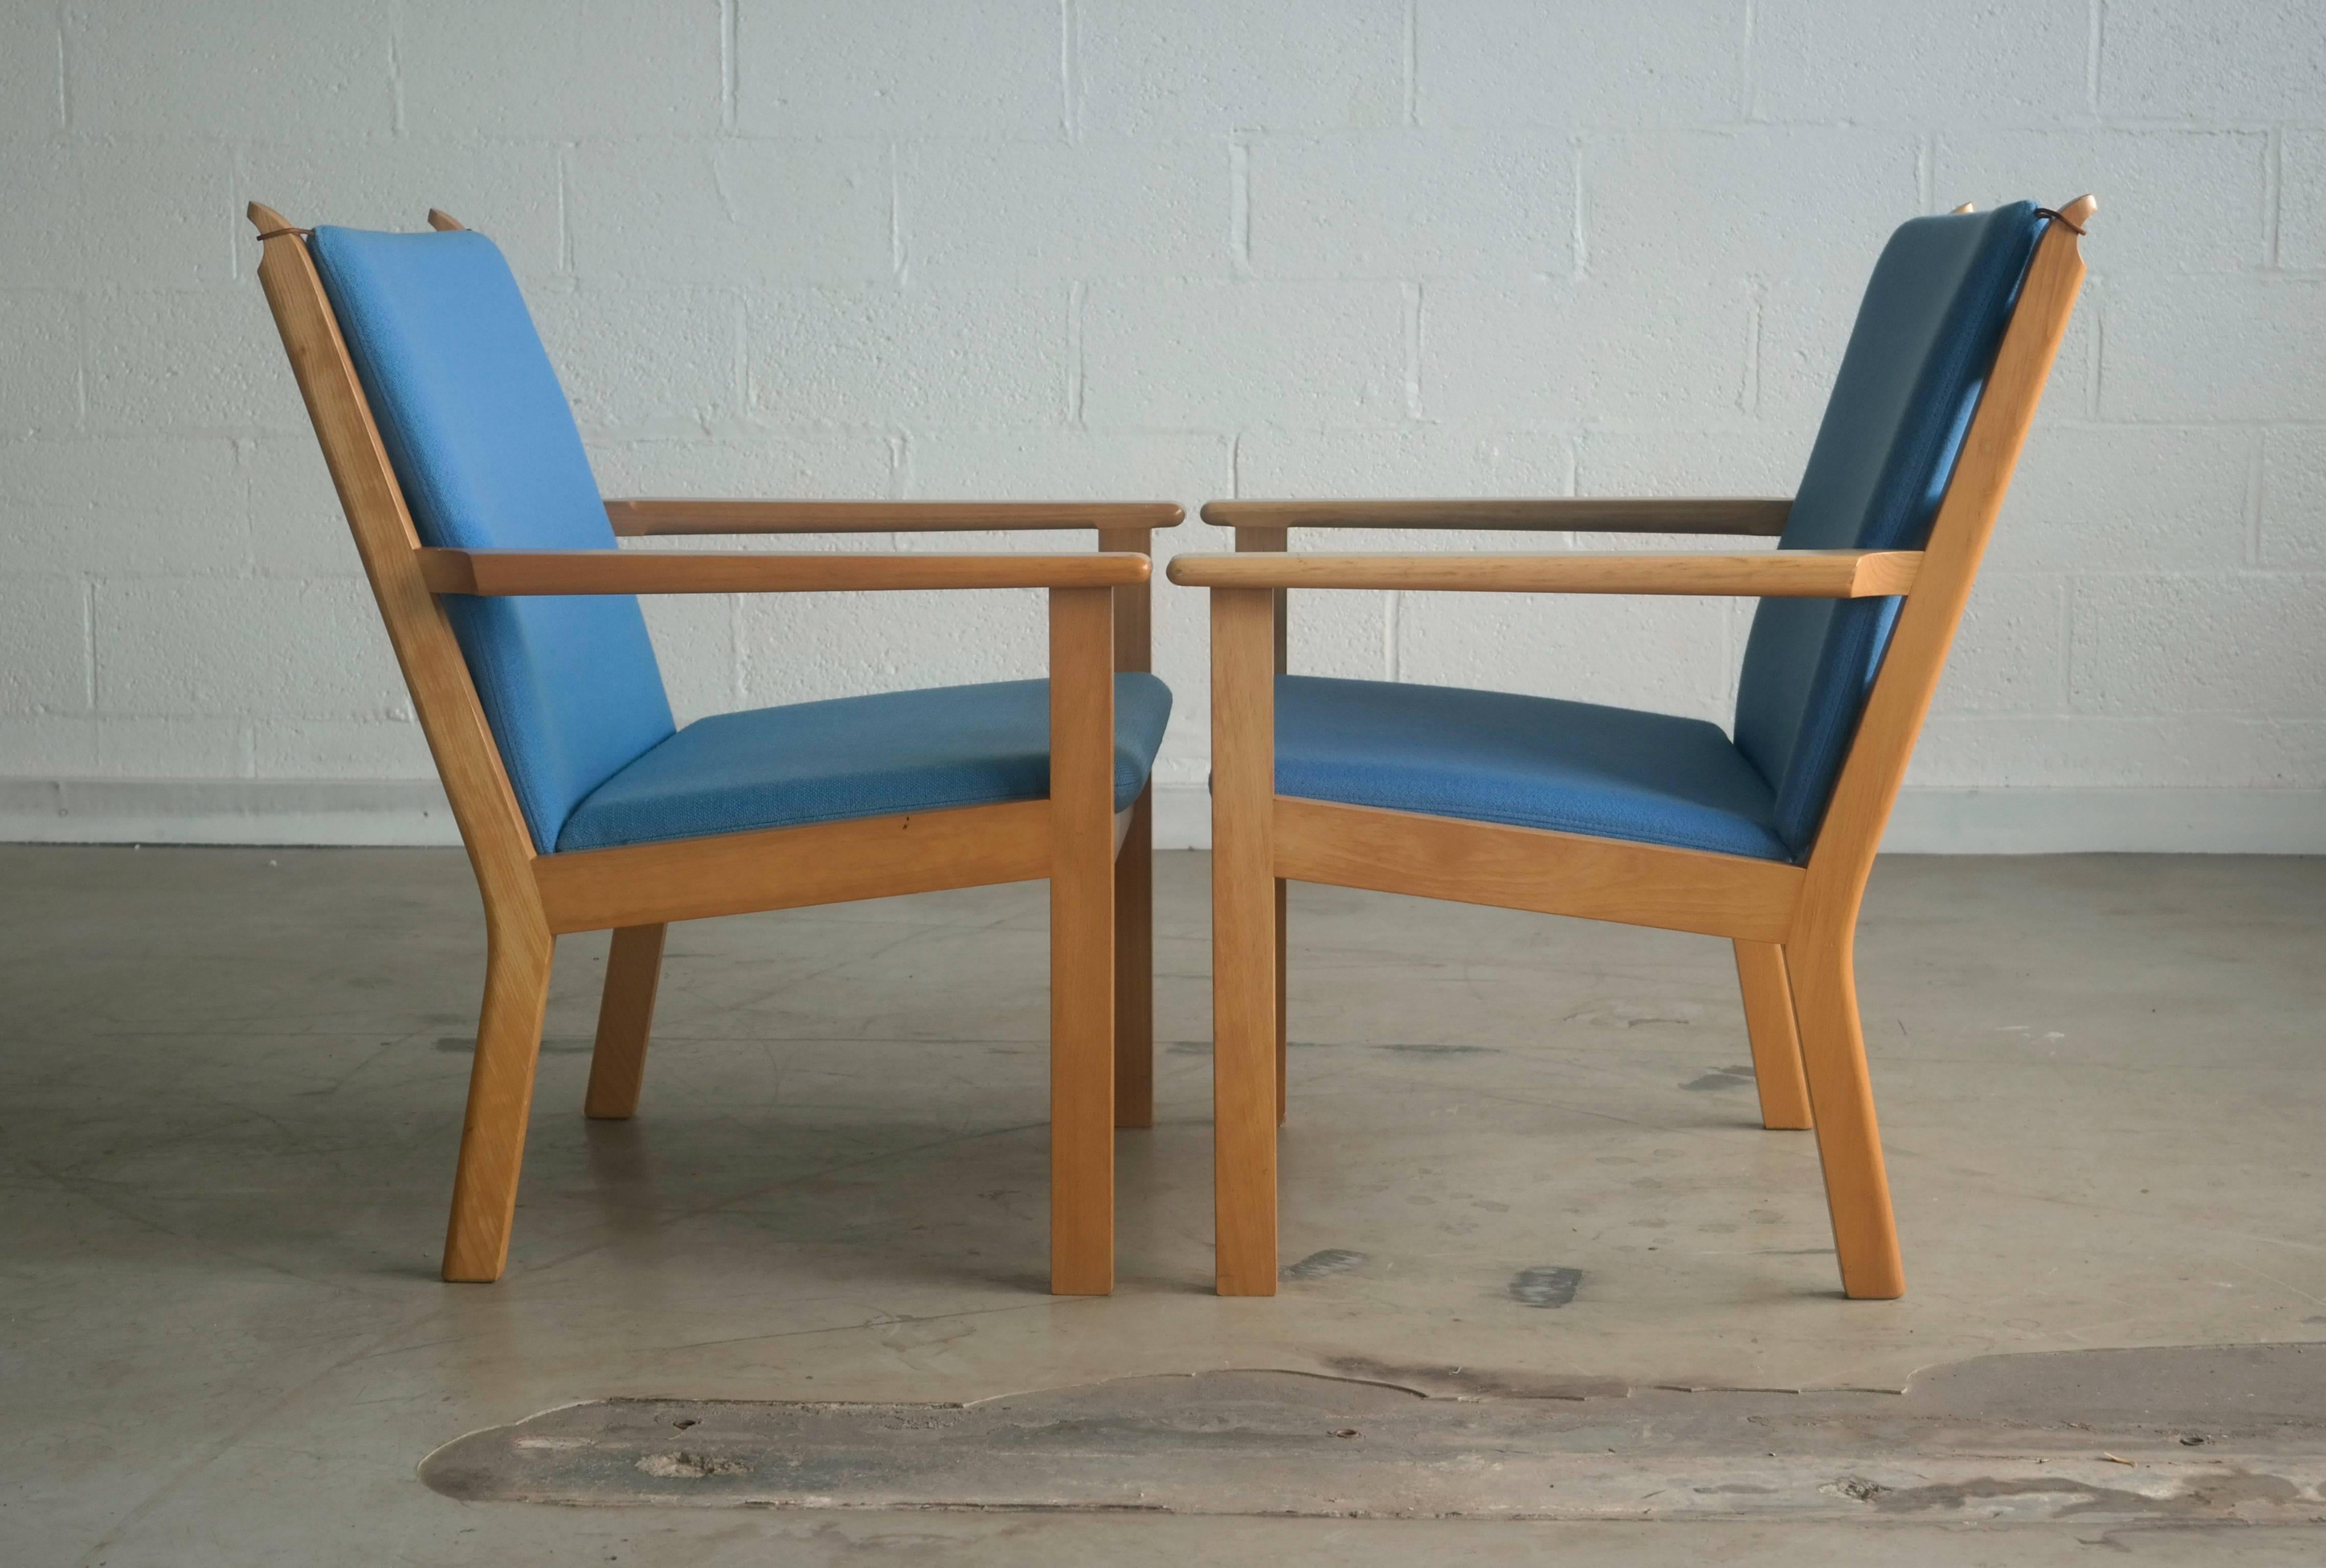 Two elegant Danish easy chairs Model GE 284 designed by Hans Wegner for GETAMA, Denmark. Chairs are made of solid beech wood and original wool fabric by Kvadrat. Some slight scuffing and scratches based on normal wear but overall in great condition.